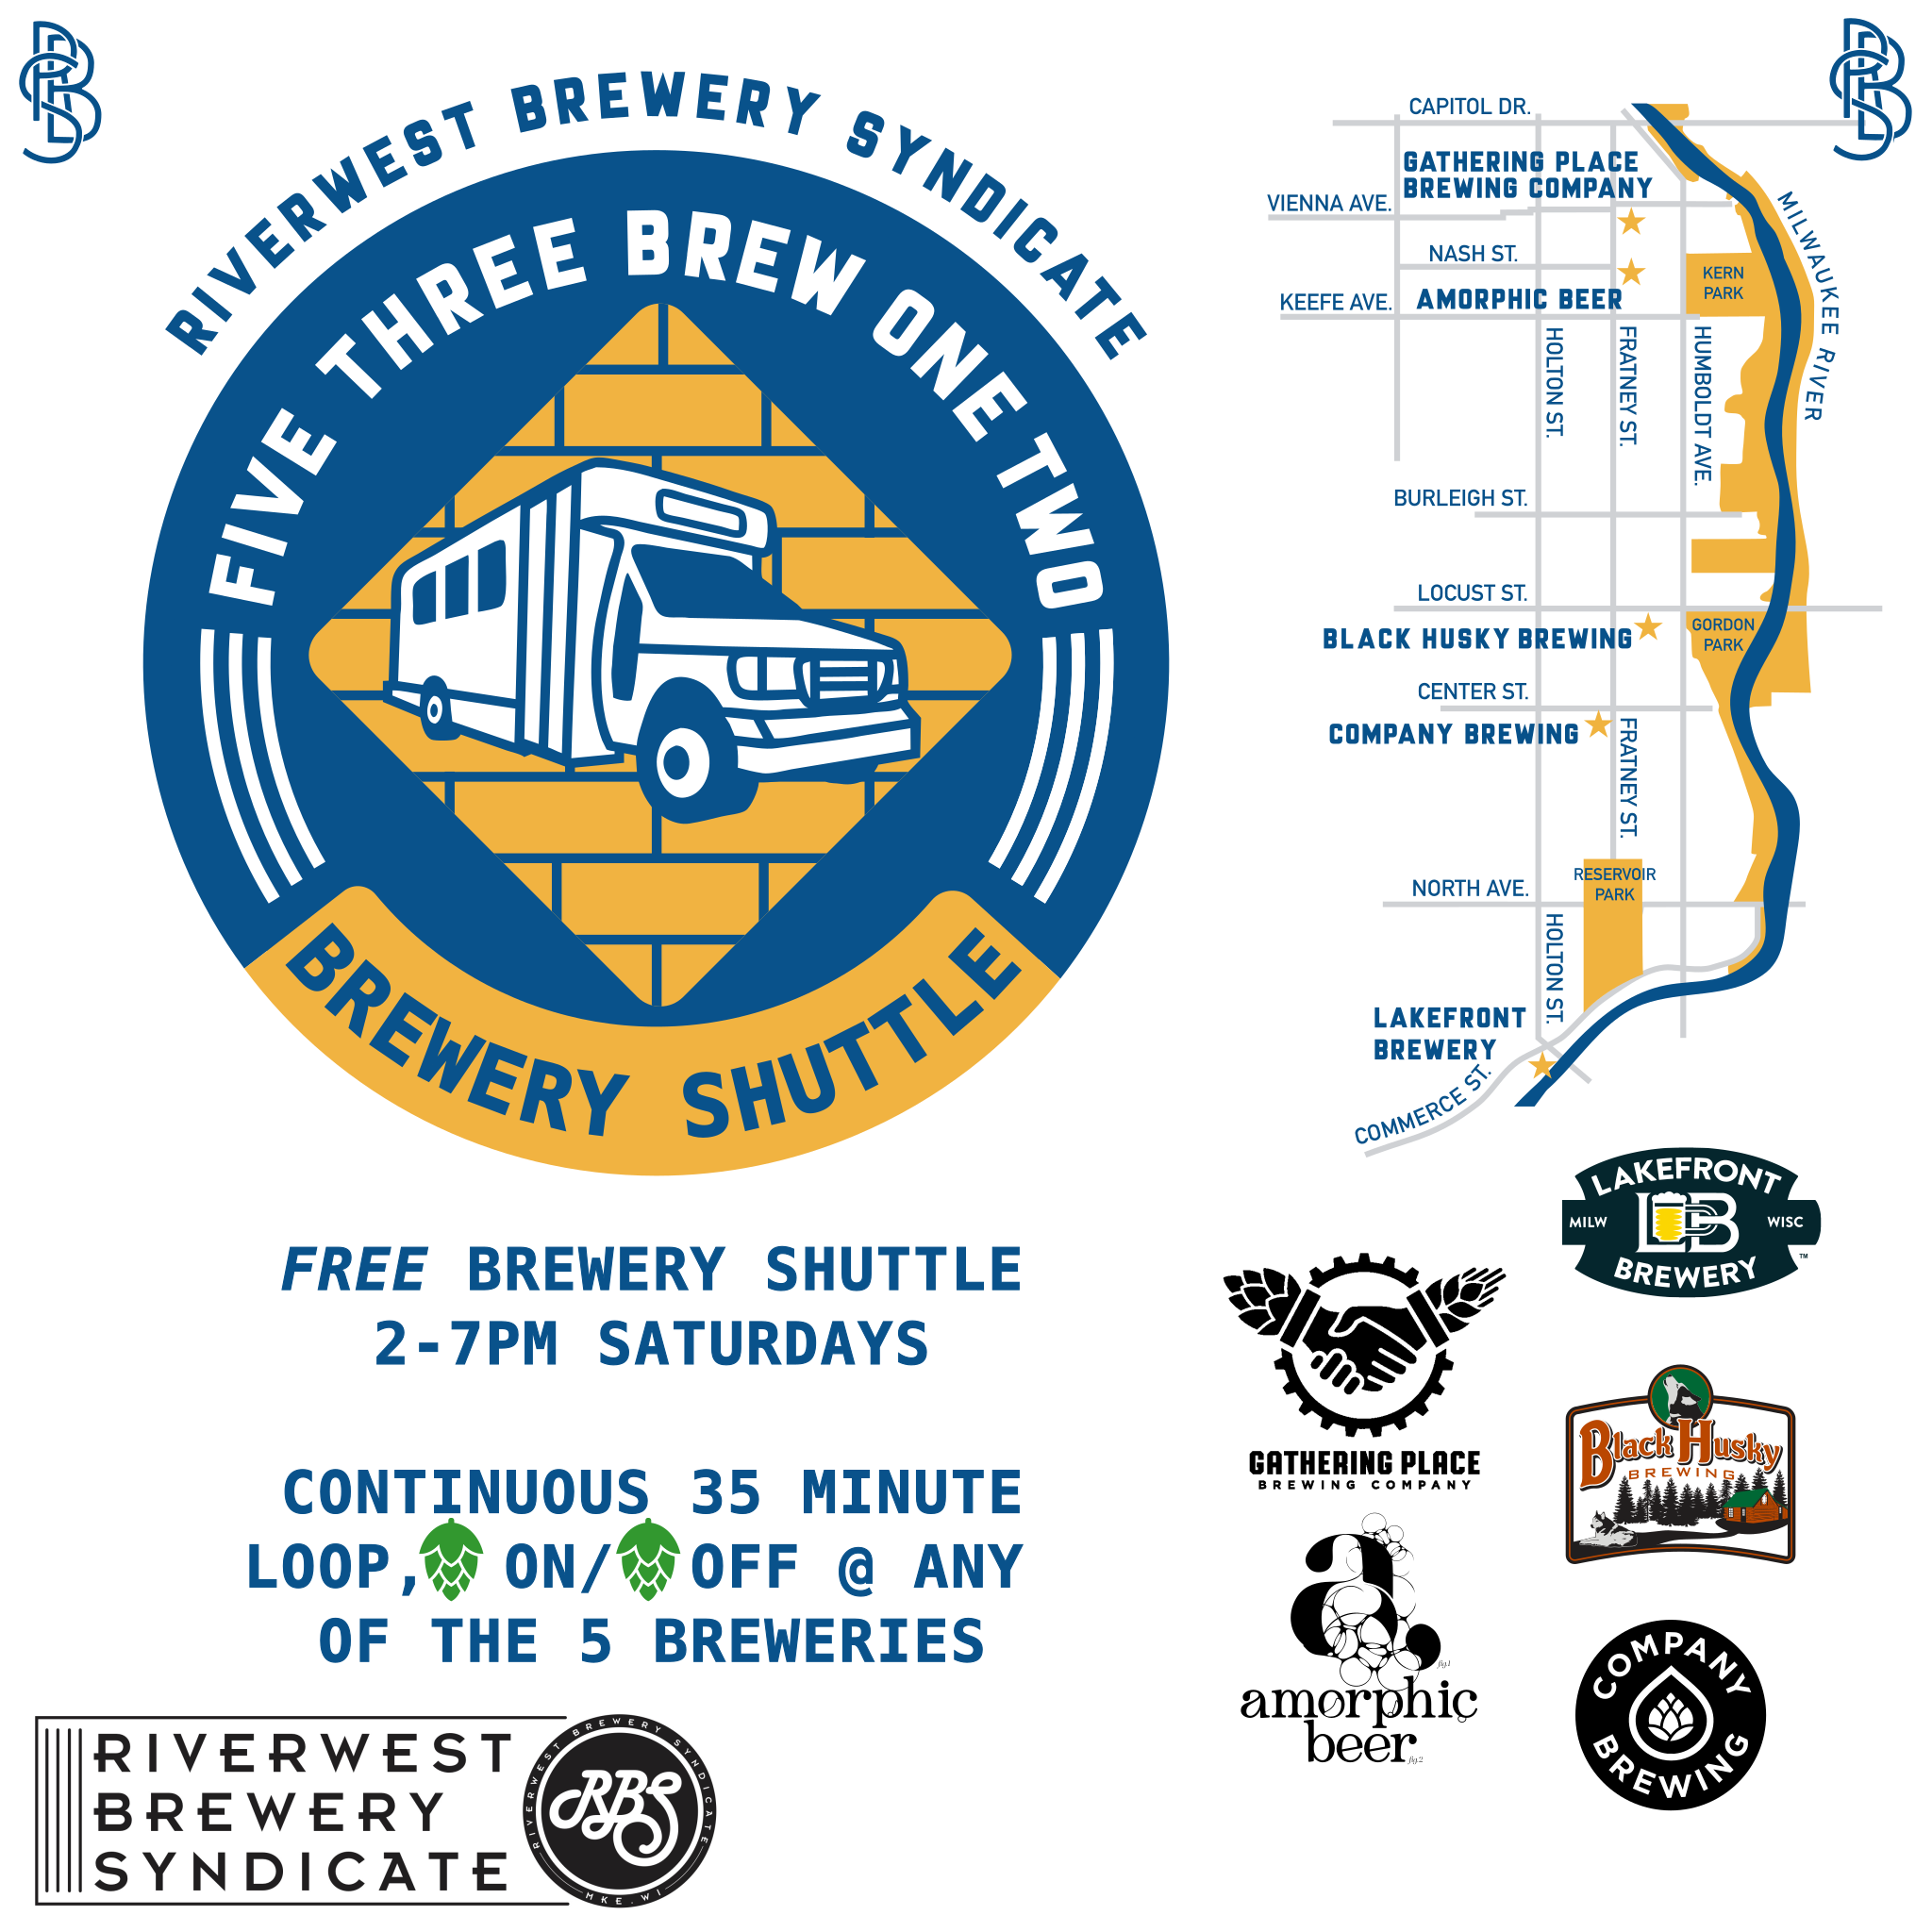 Riverwest Brewery Syndicate Shuttle Annoucement